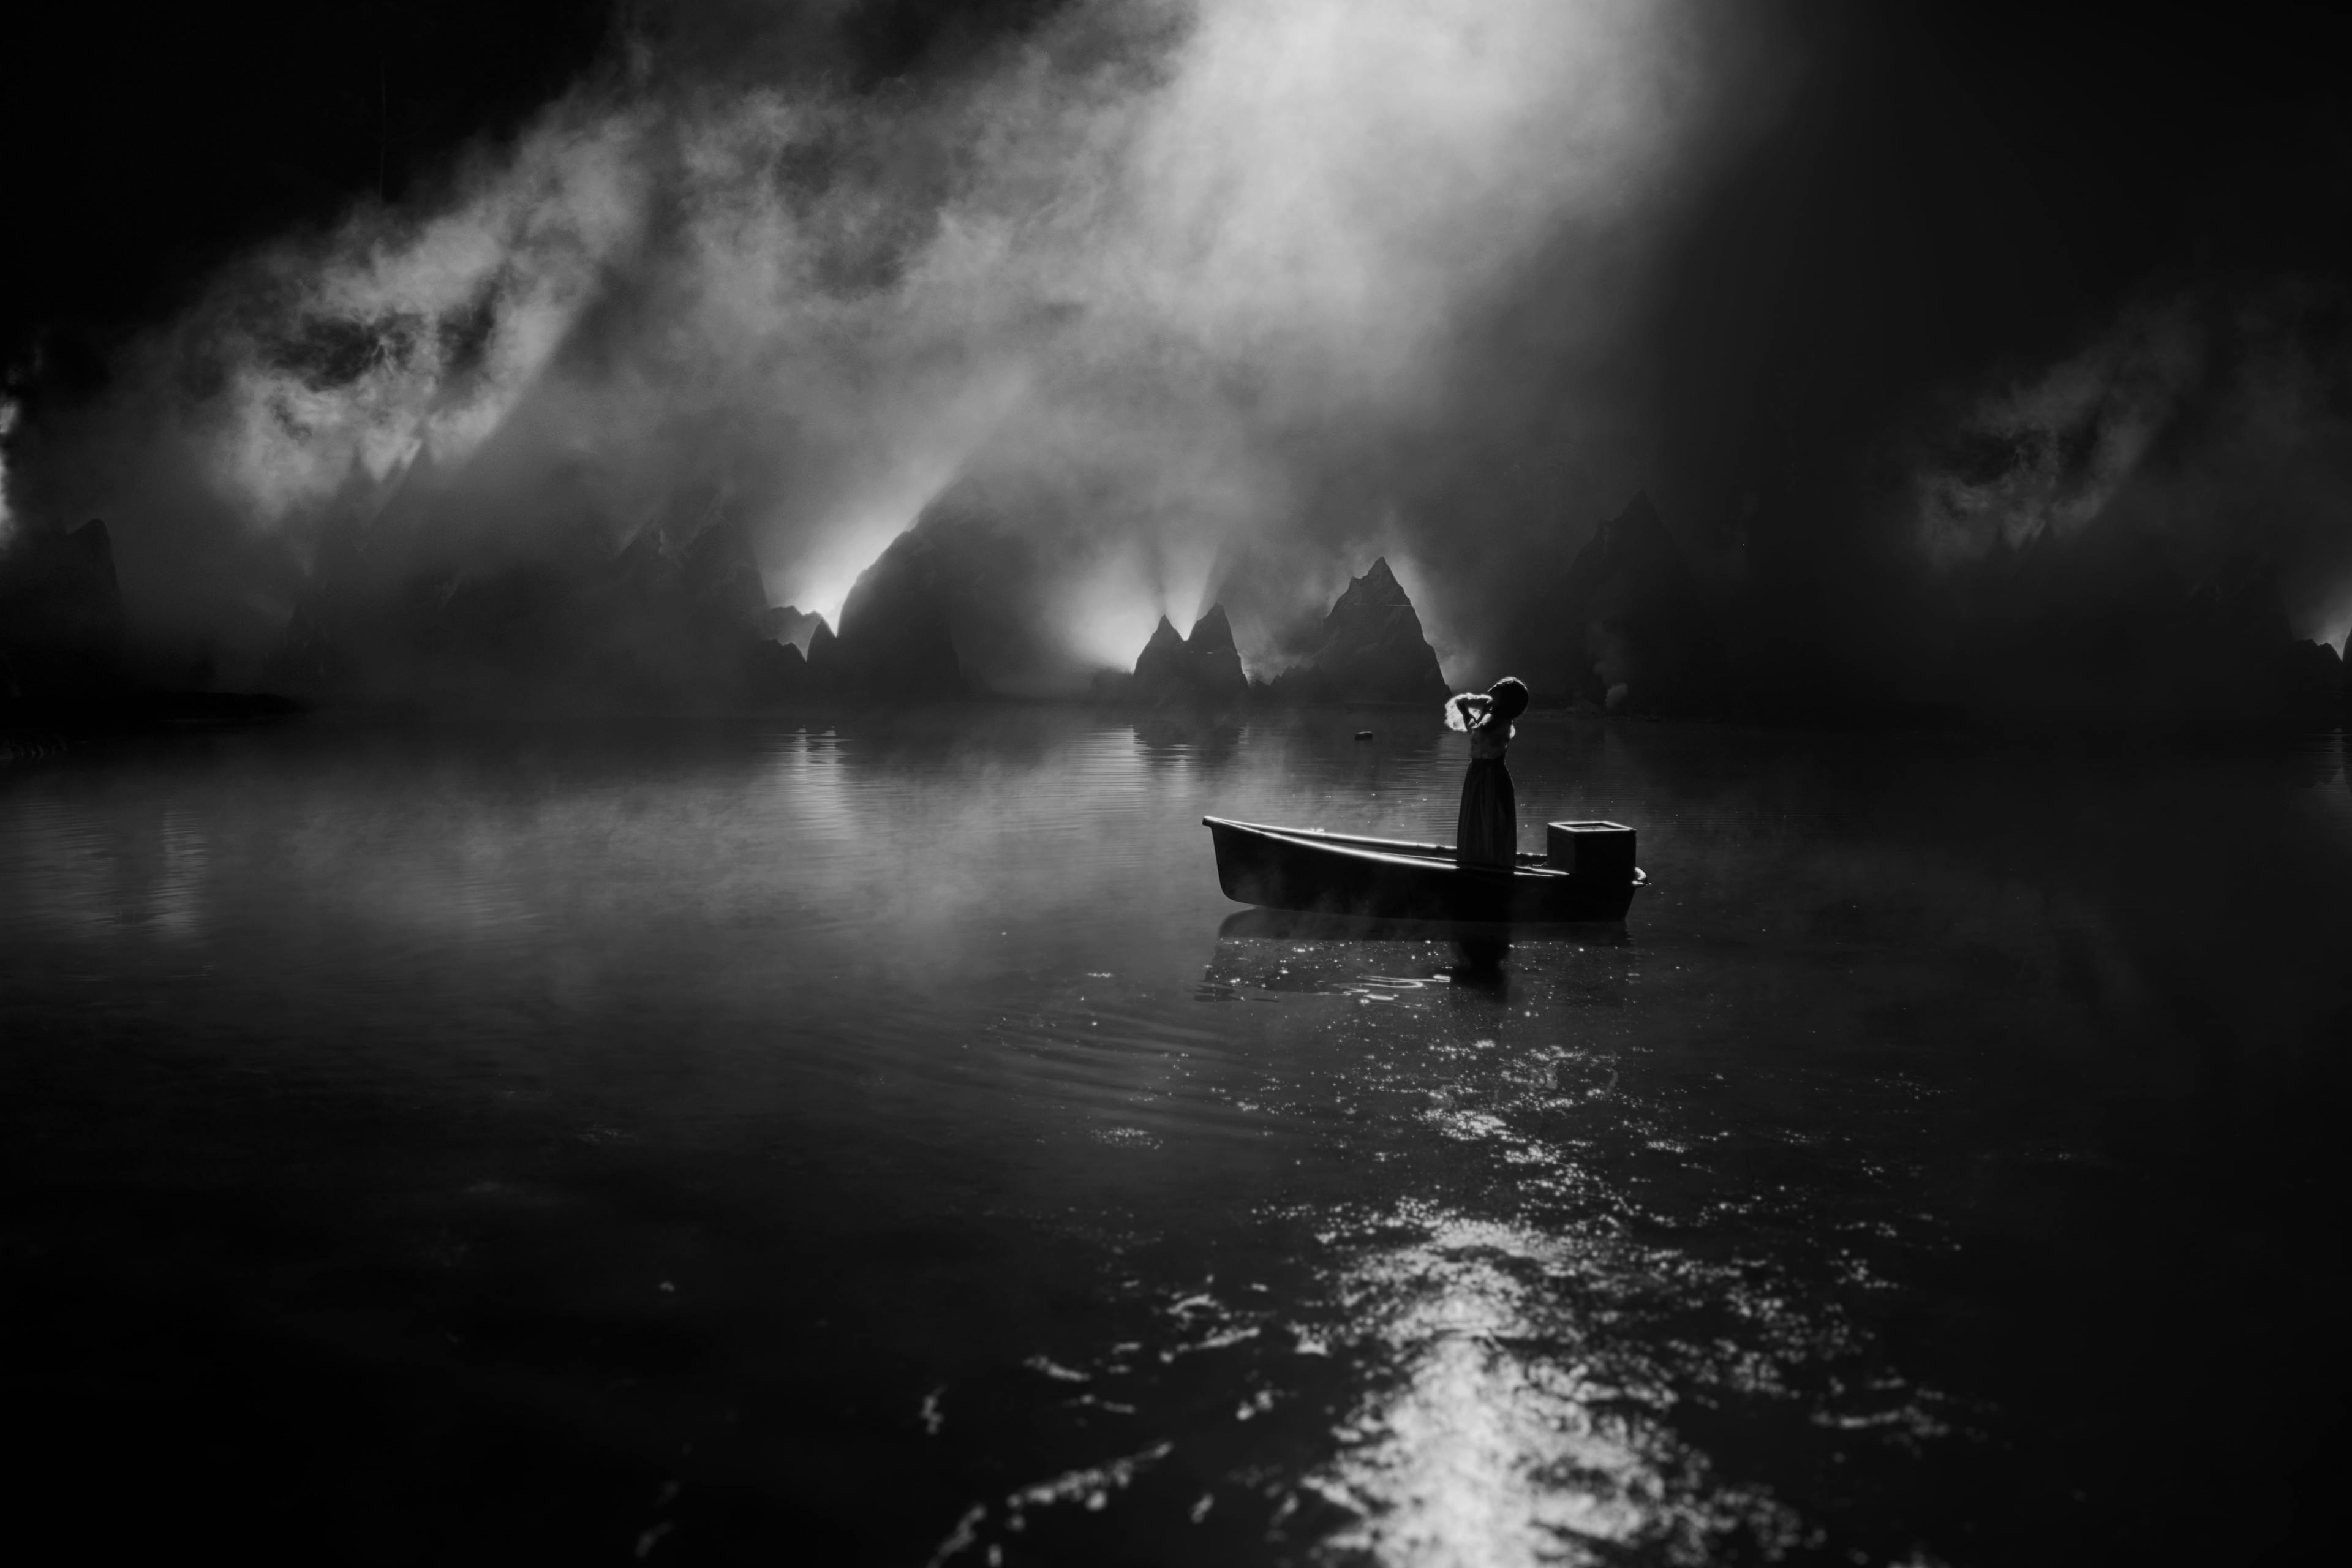 Mitski in a wooden row boat in the middle of a body of water with fog and mountains in the back